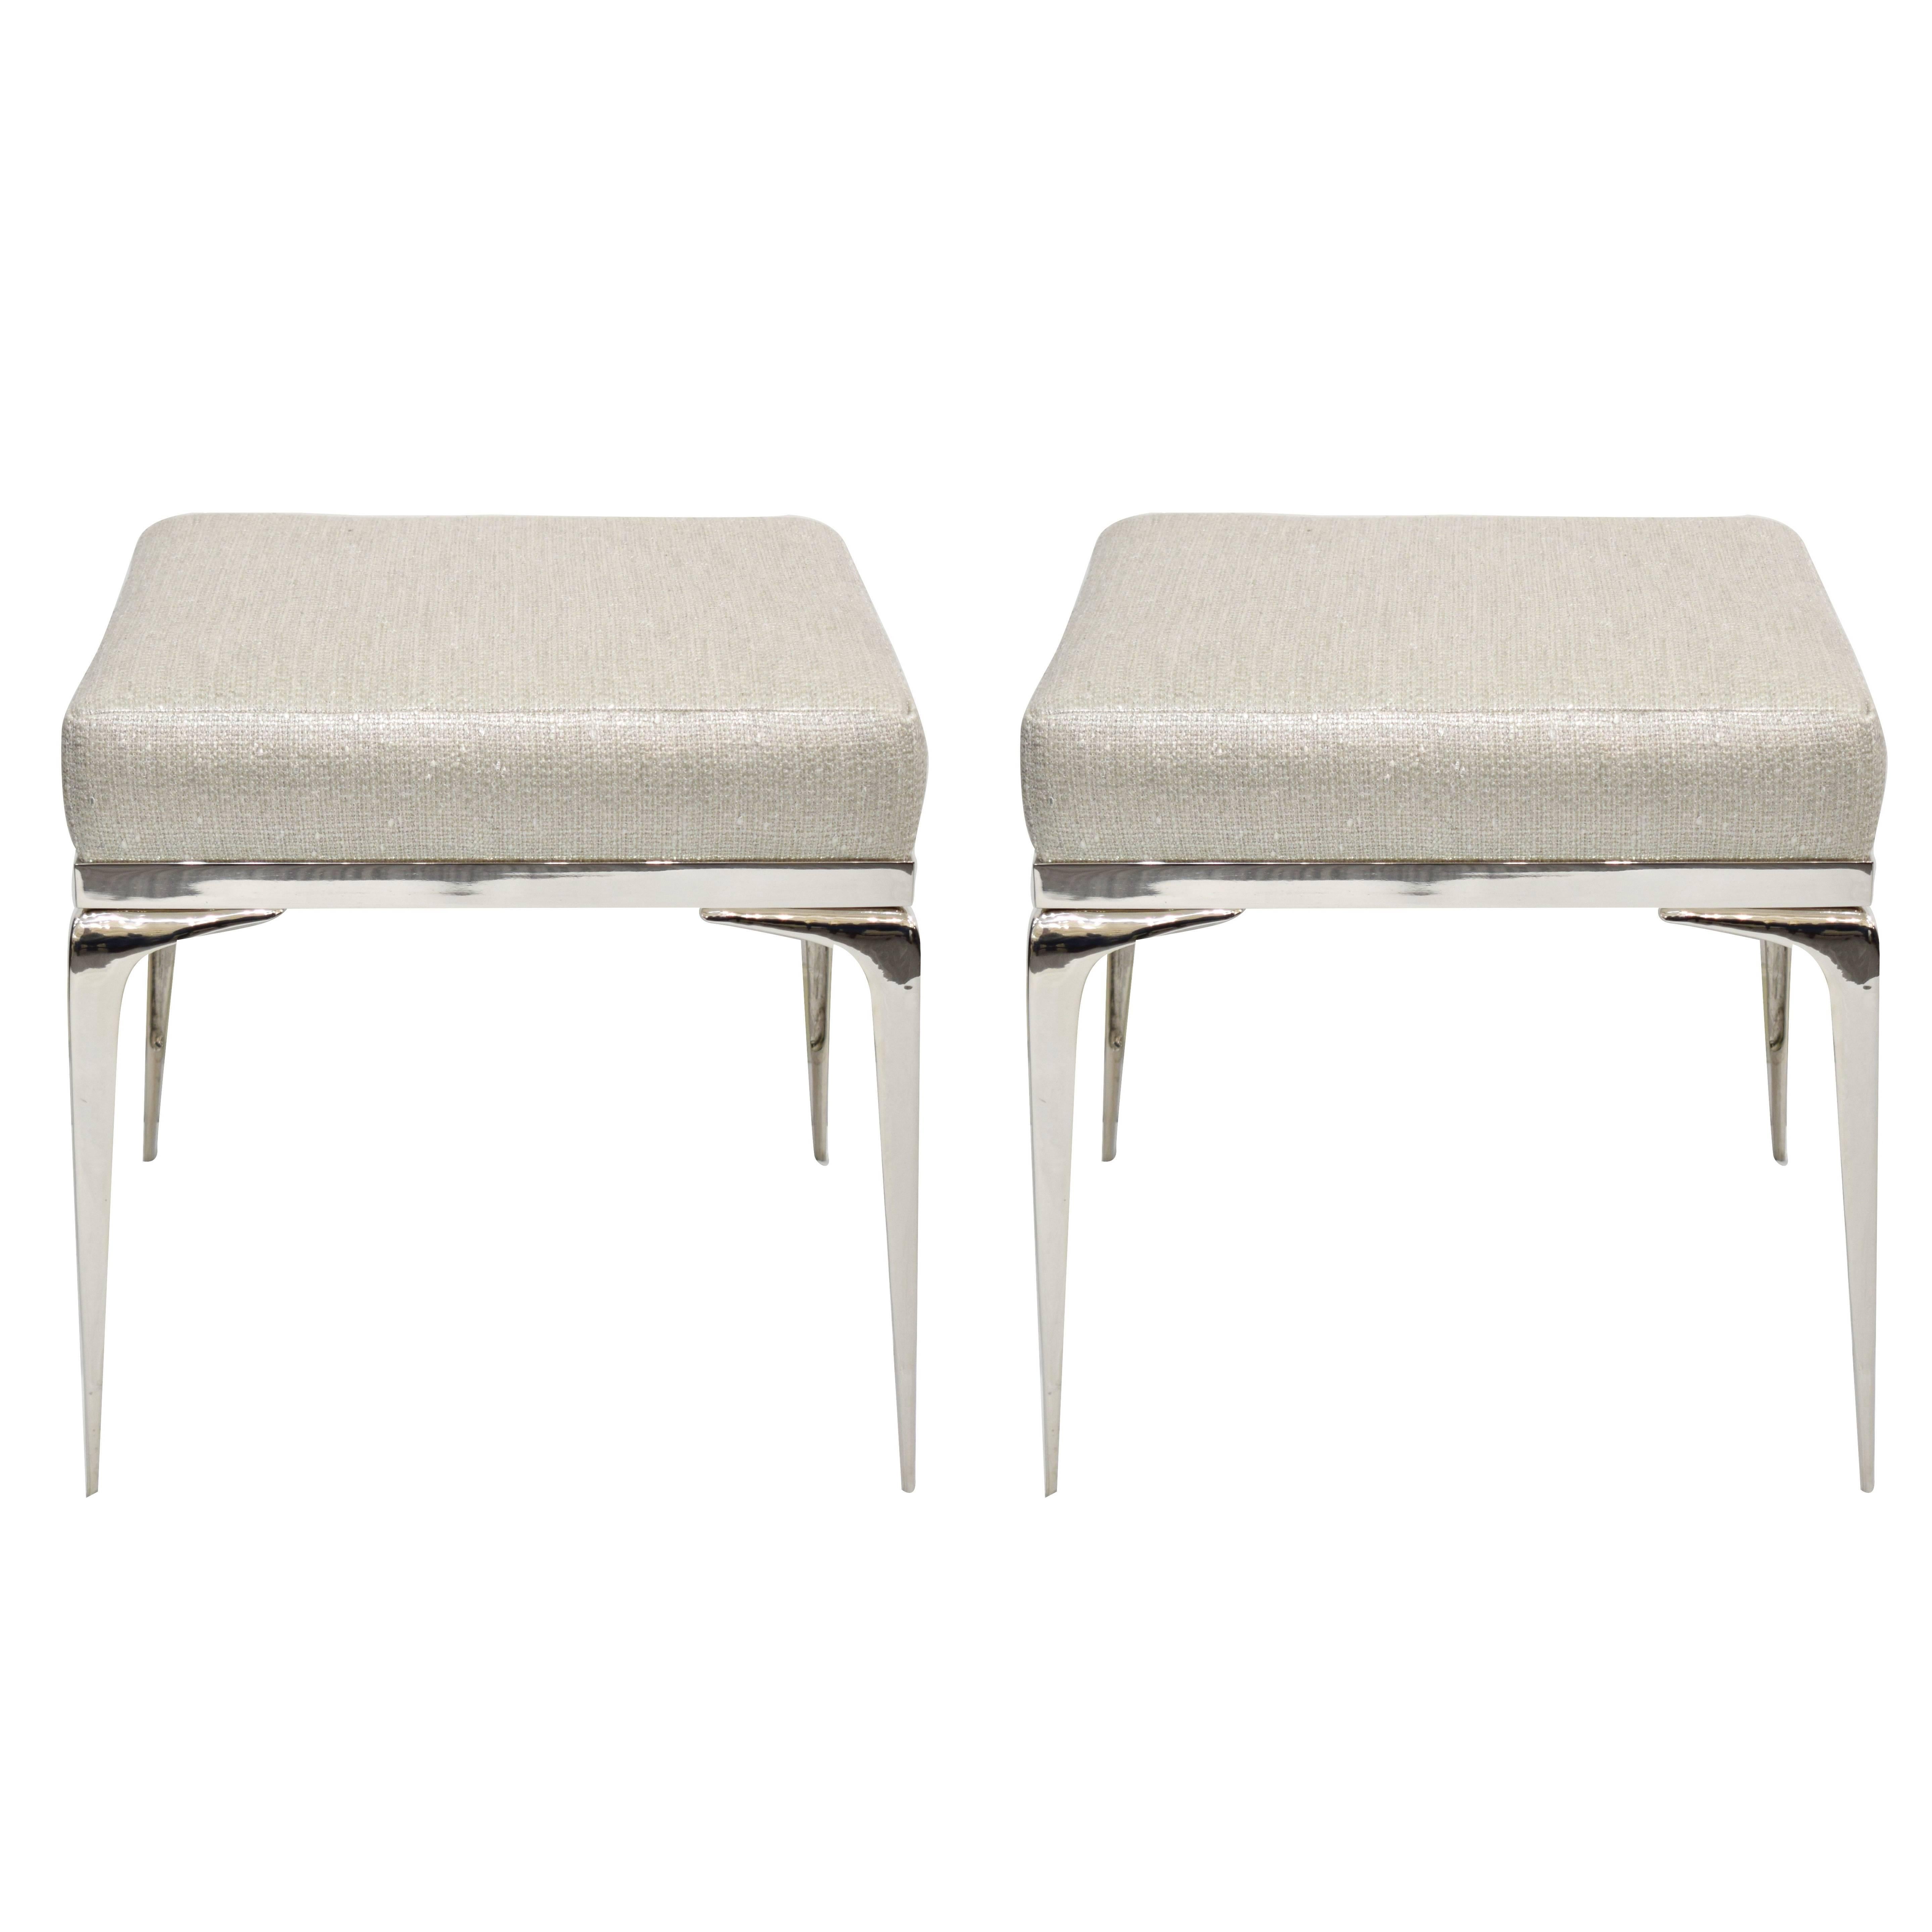 Pair of Nickel Banded Stiletto Ottomans For Sale